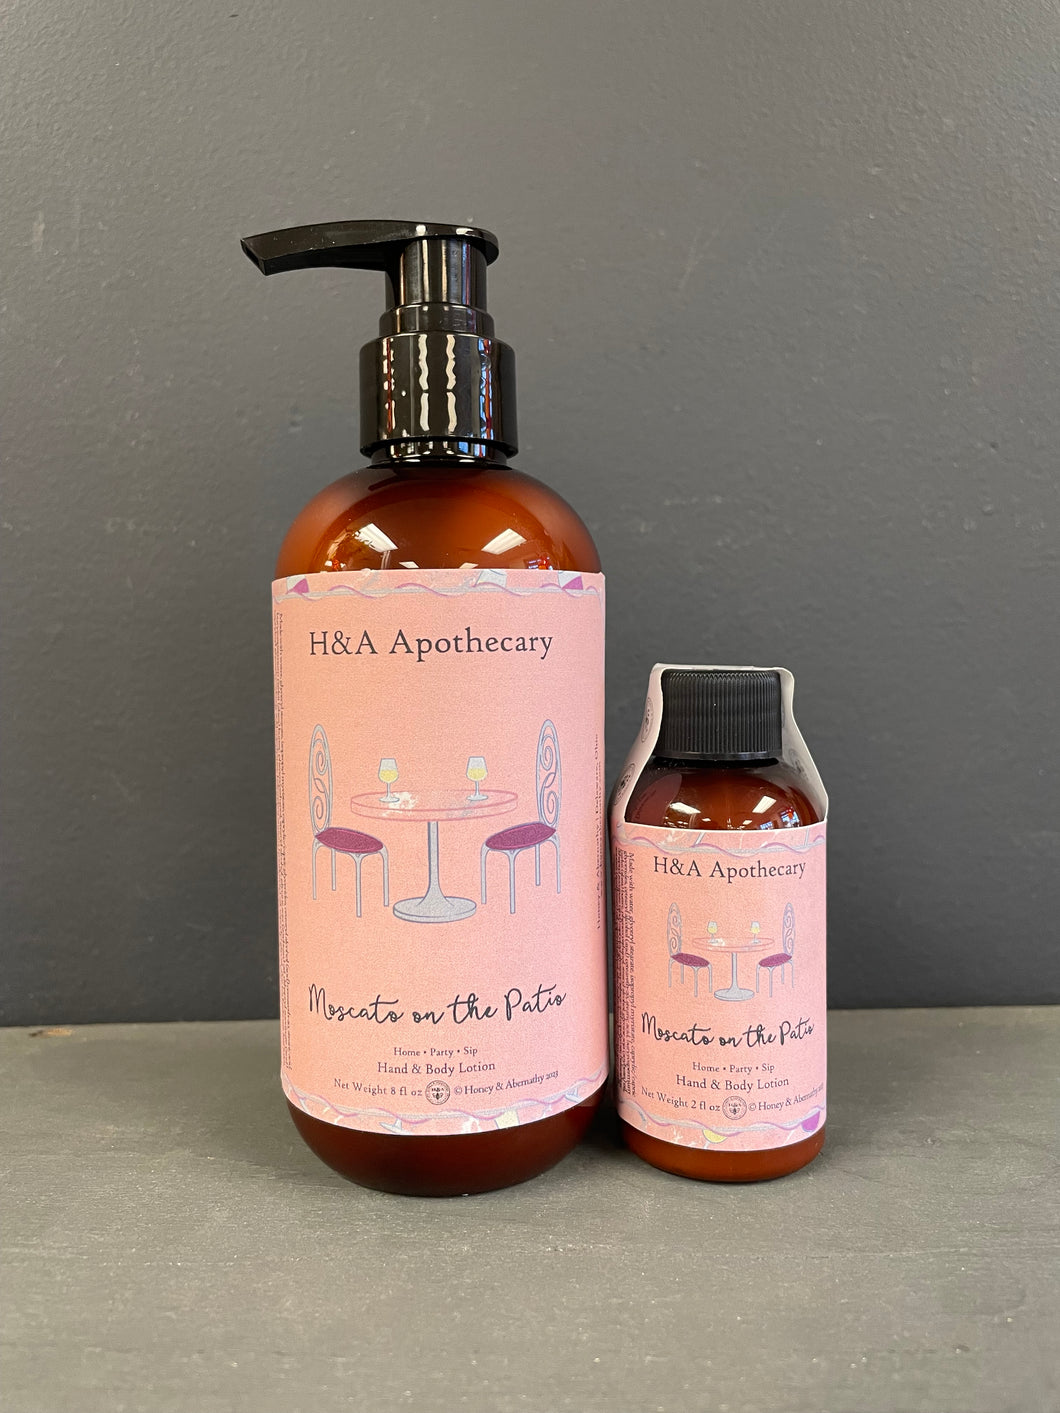 H&A Apothecary Moscato on the Patio Hand & Body Lotion